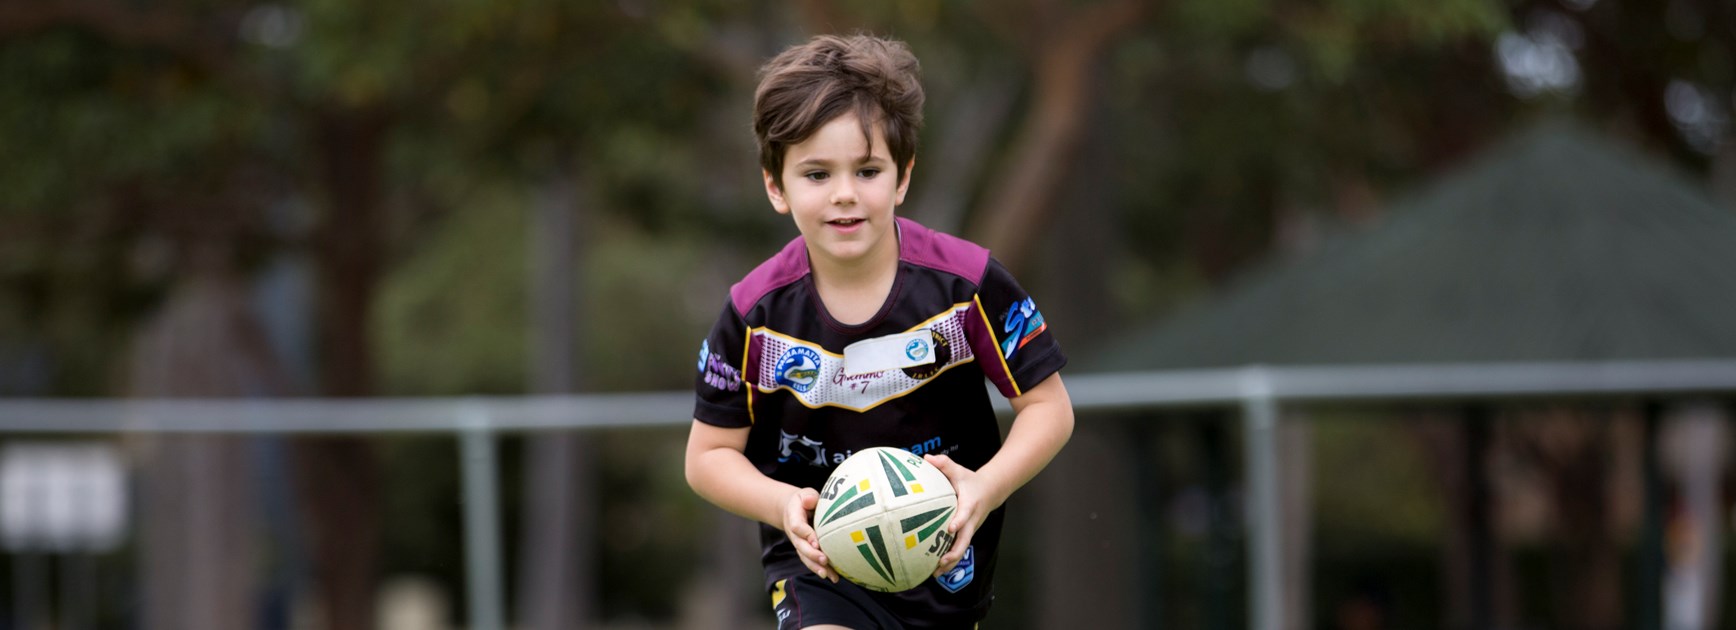 NSW Government rebates available for Junior League players